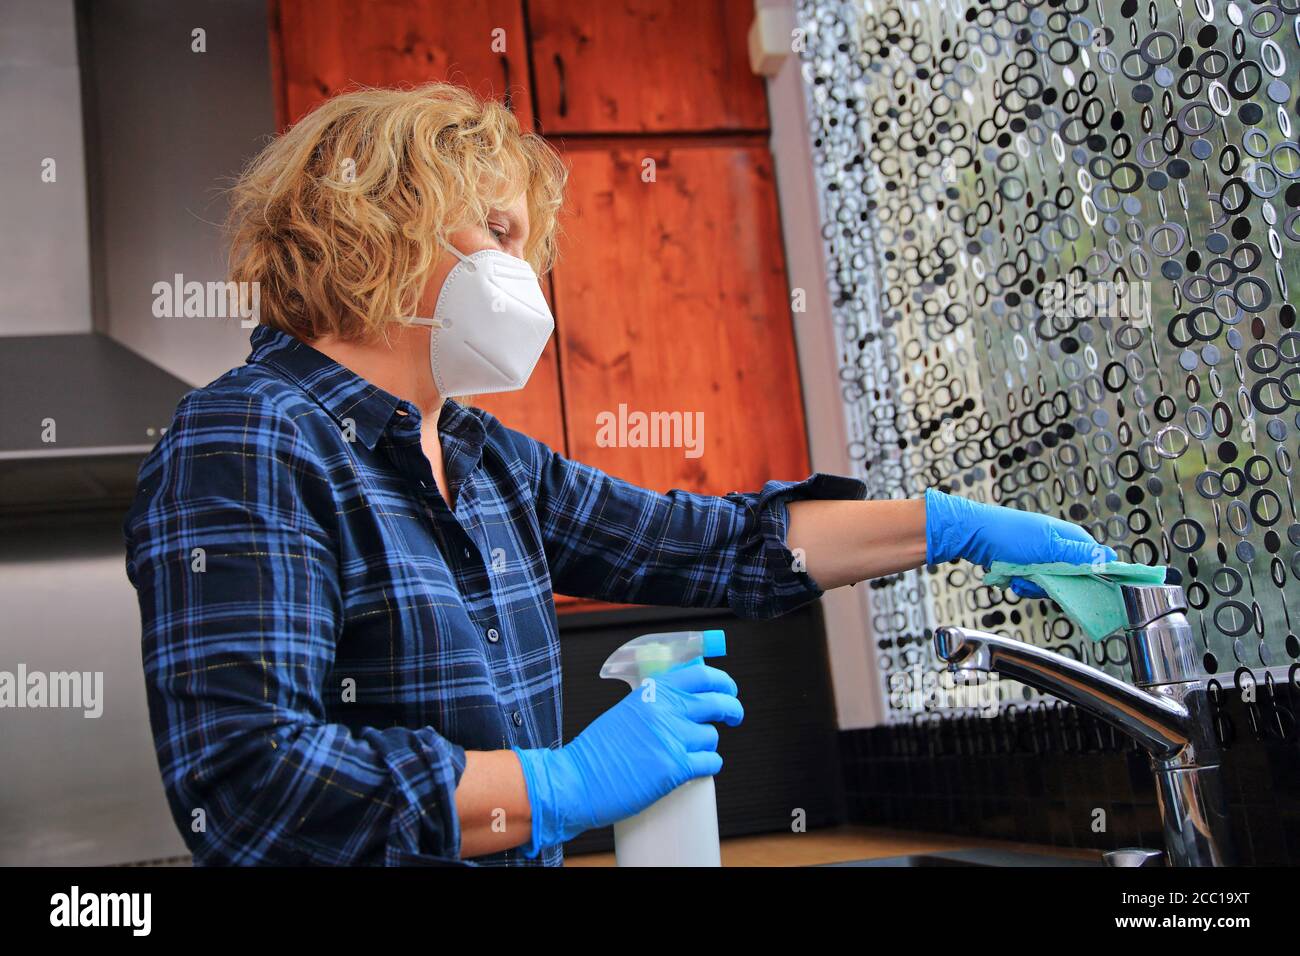 Daily life and cleaning during the Coronavirus epidemic Stock Photo